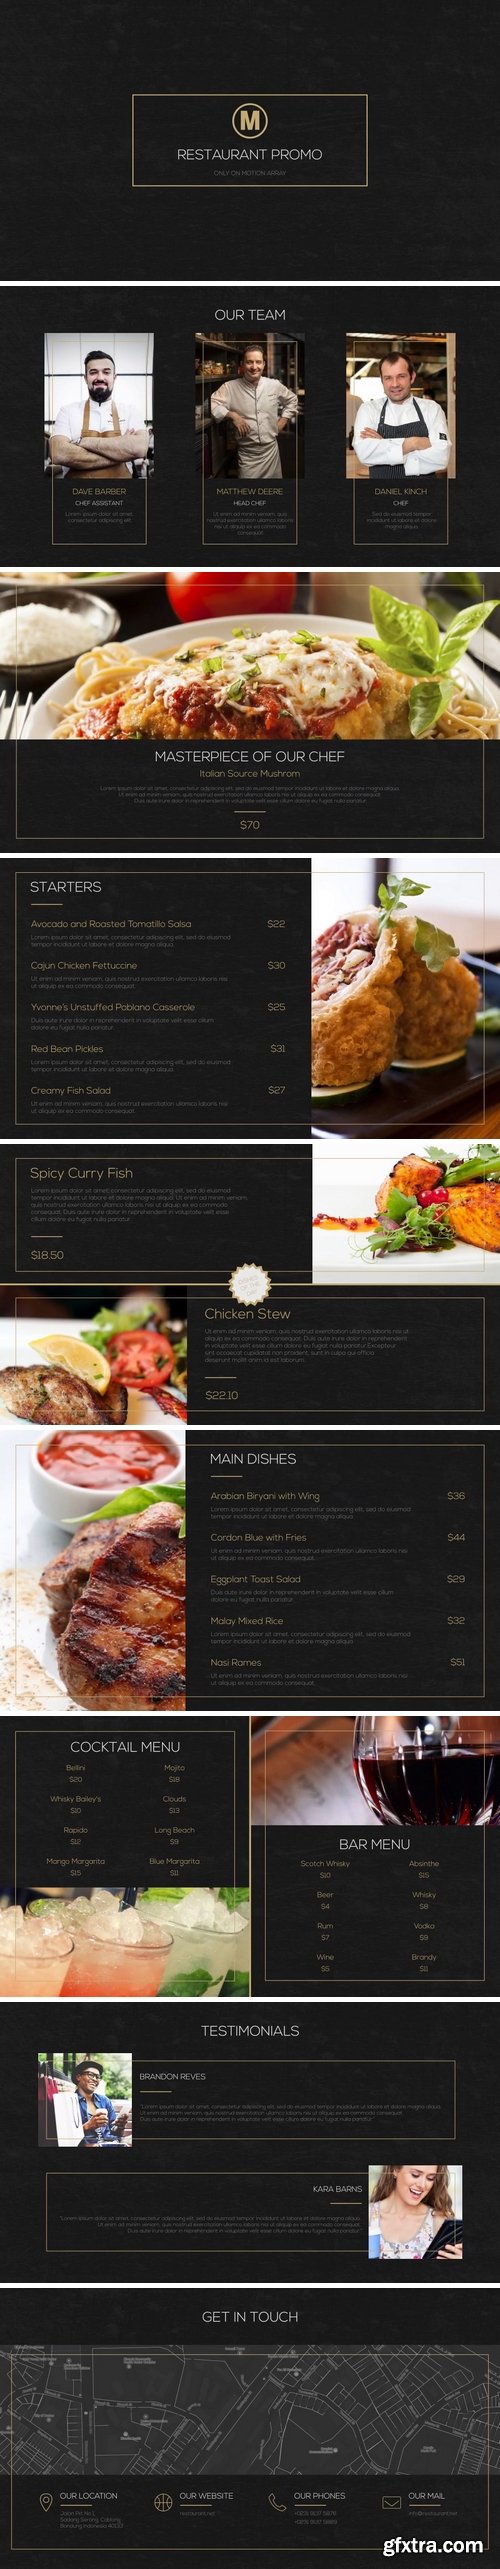 MotionArray - Restaurant Promo After Effects Templates 61103